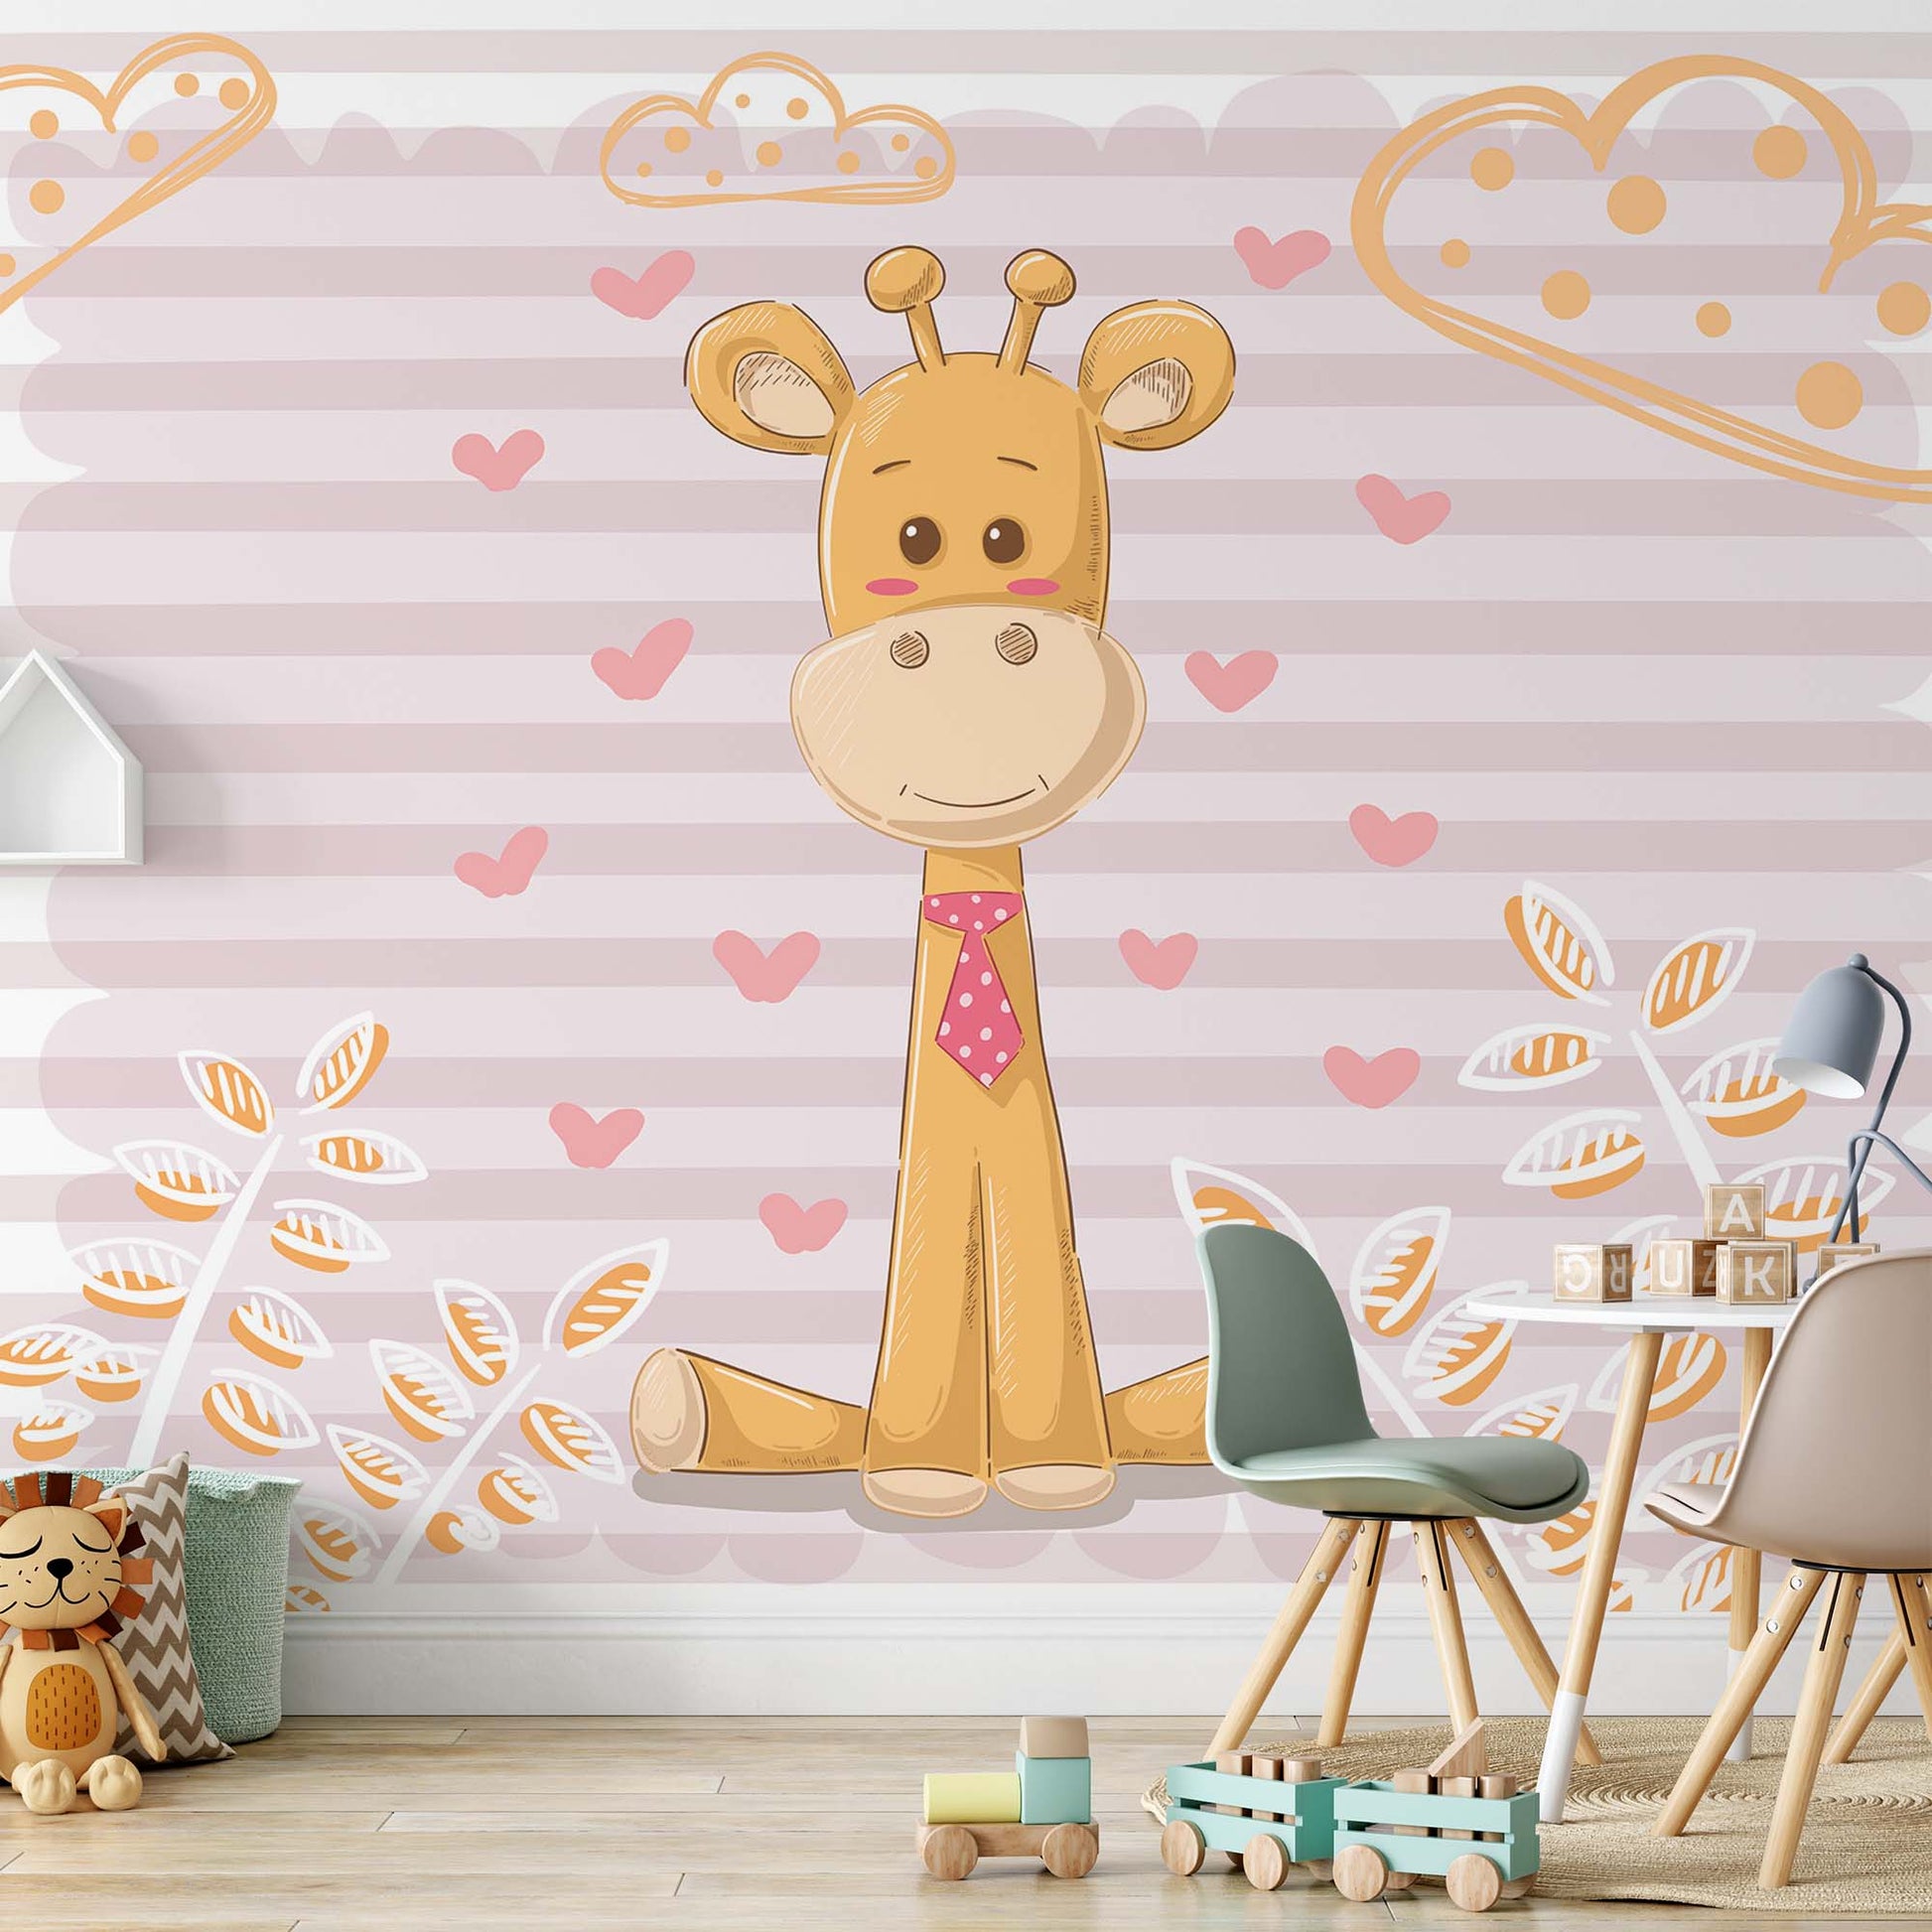 The Cuddlies: Jake and Kirsty Wallpaper - USTAD HOME